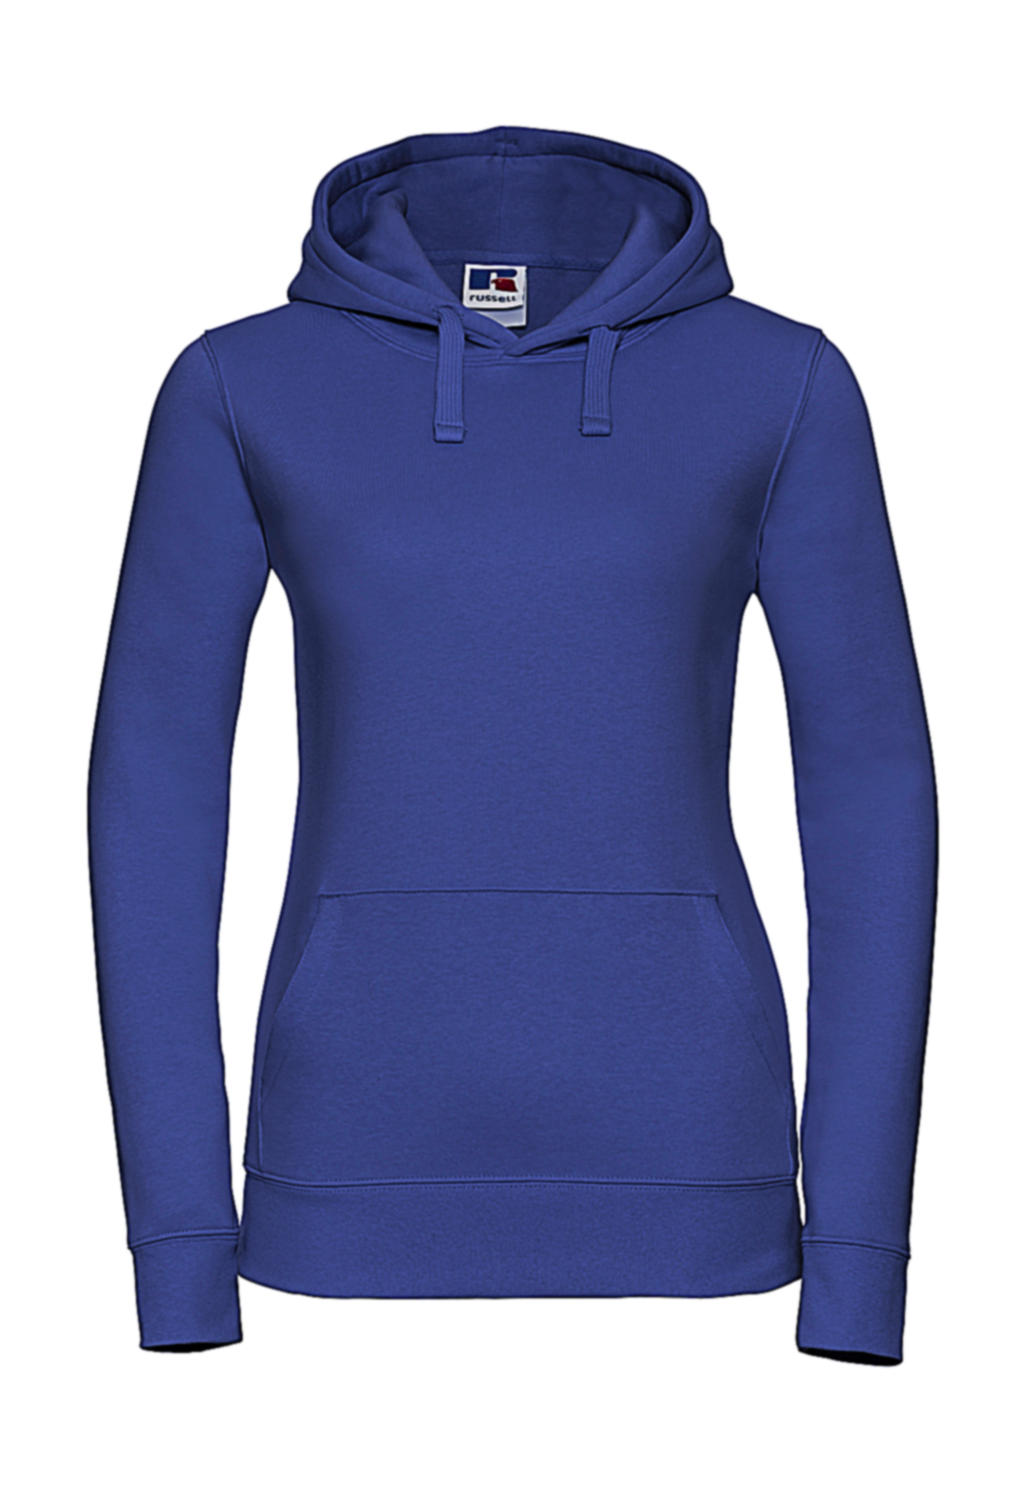  Ladies Authentic Hooded Sweat in Farbe Bright Royal